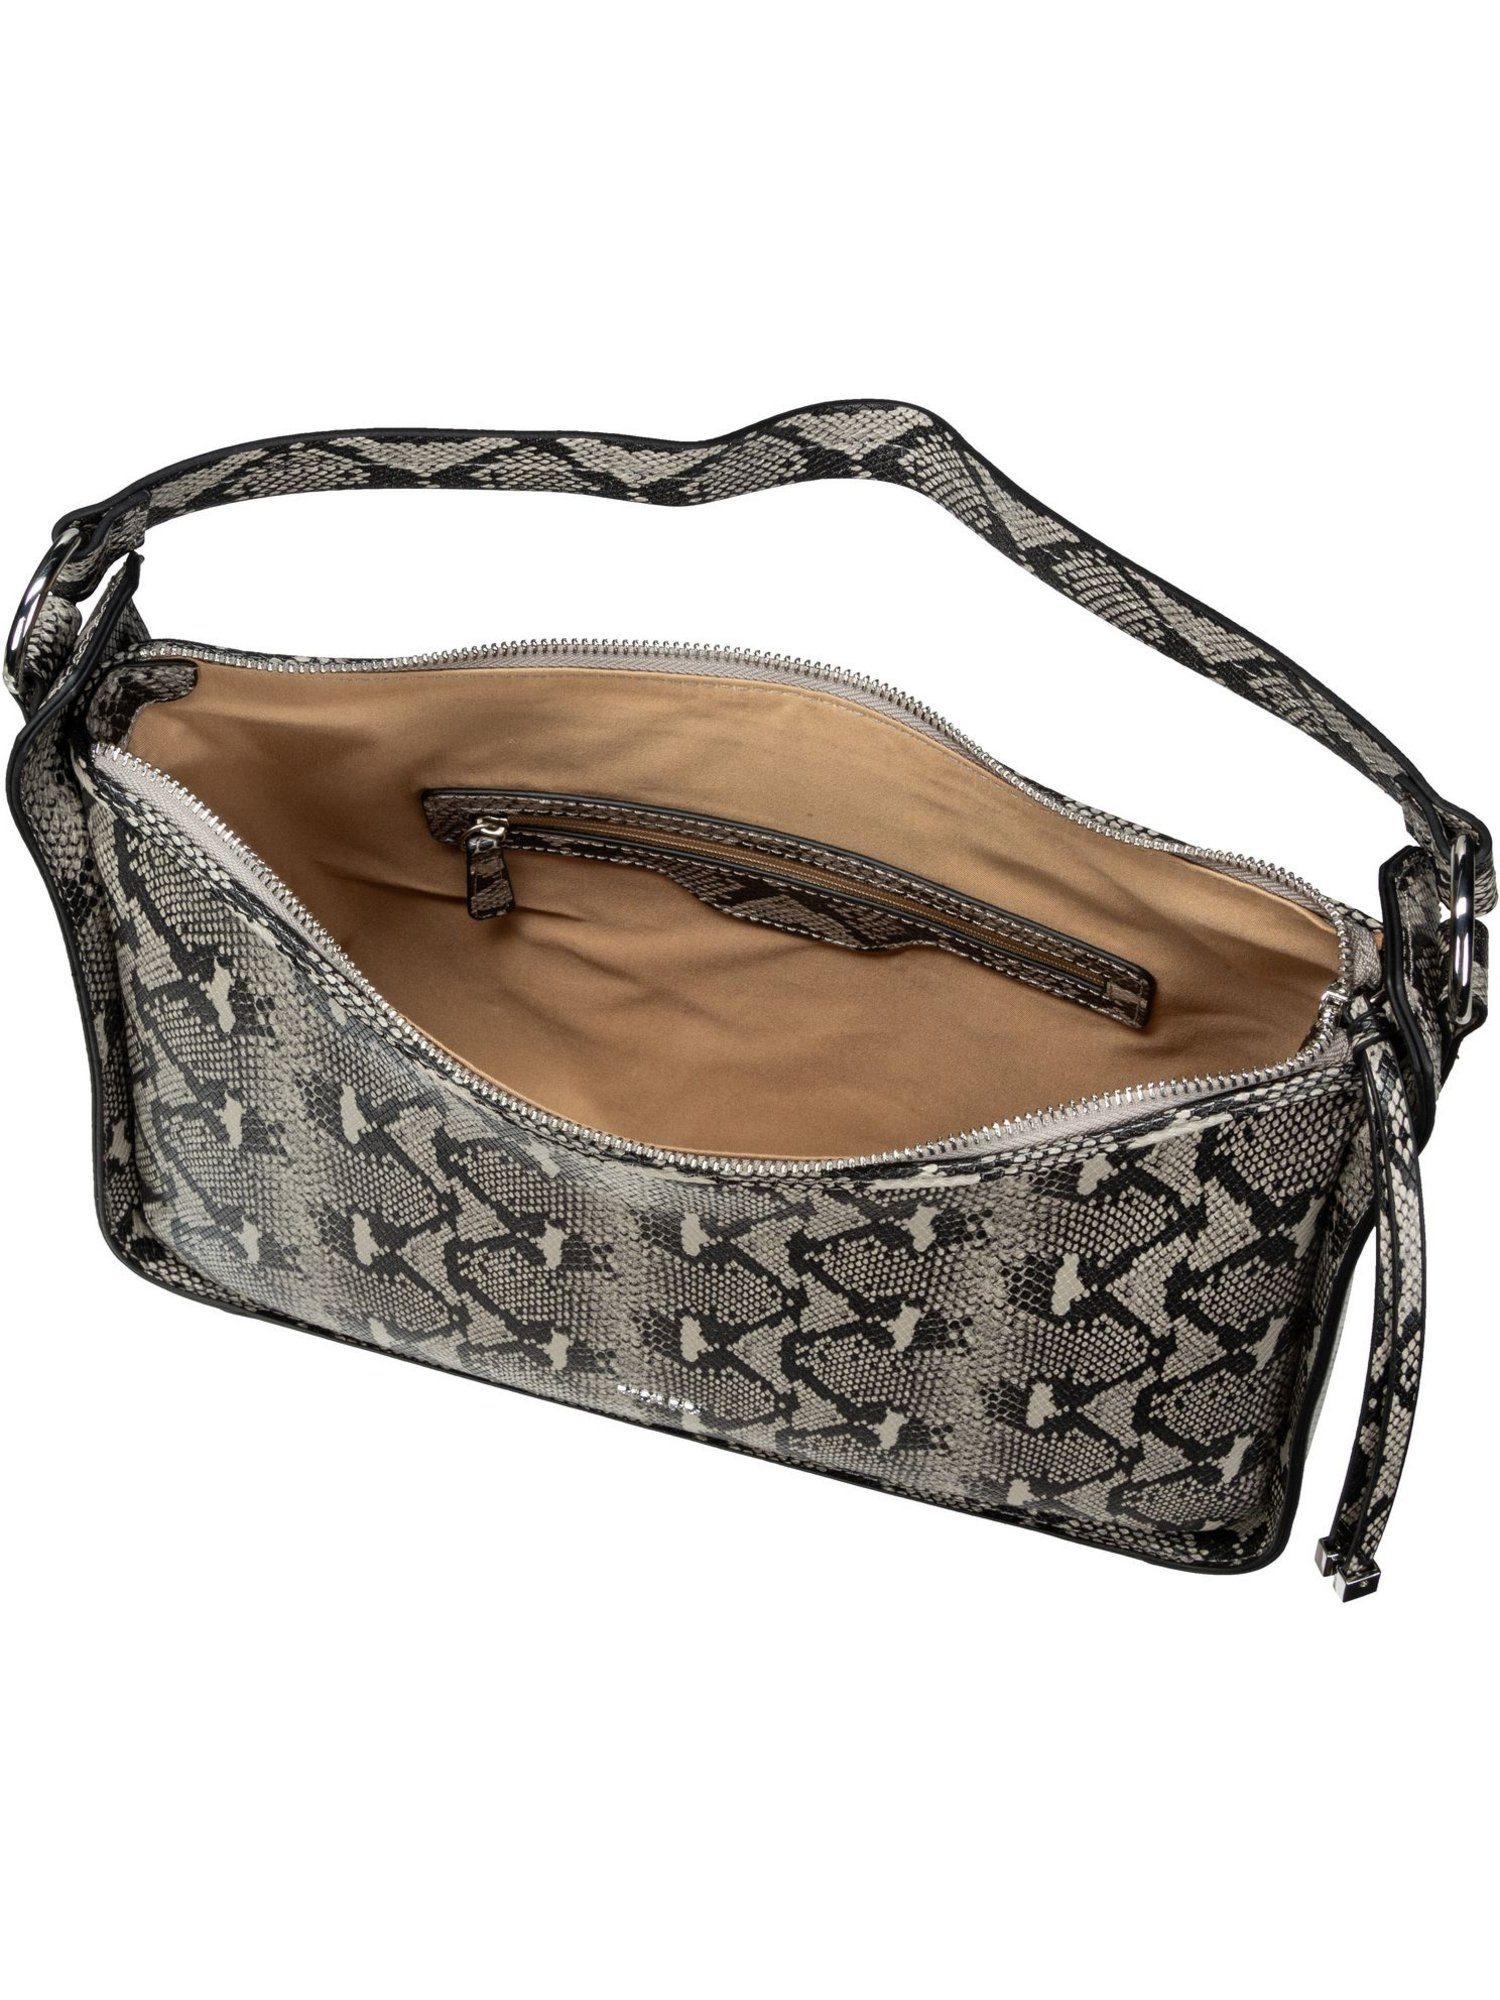 Picard Schultertasche Forever 3128 Snake